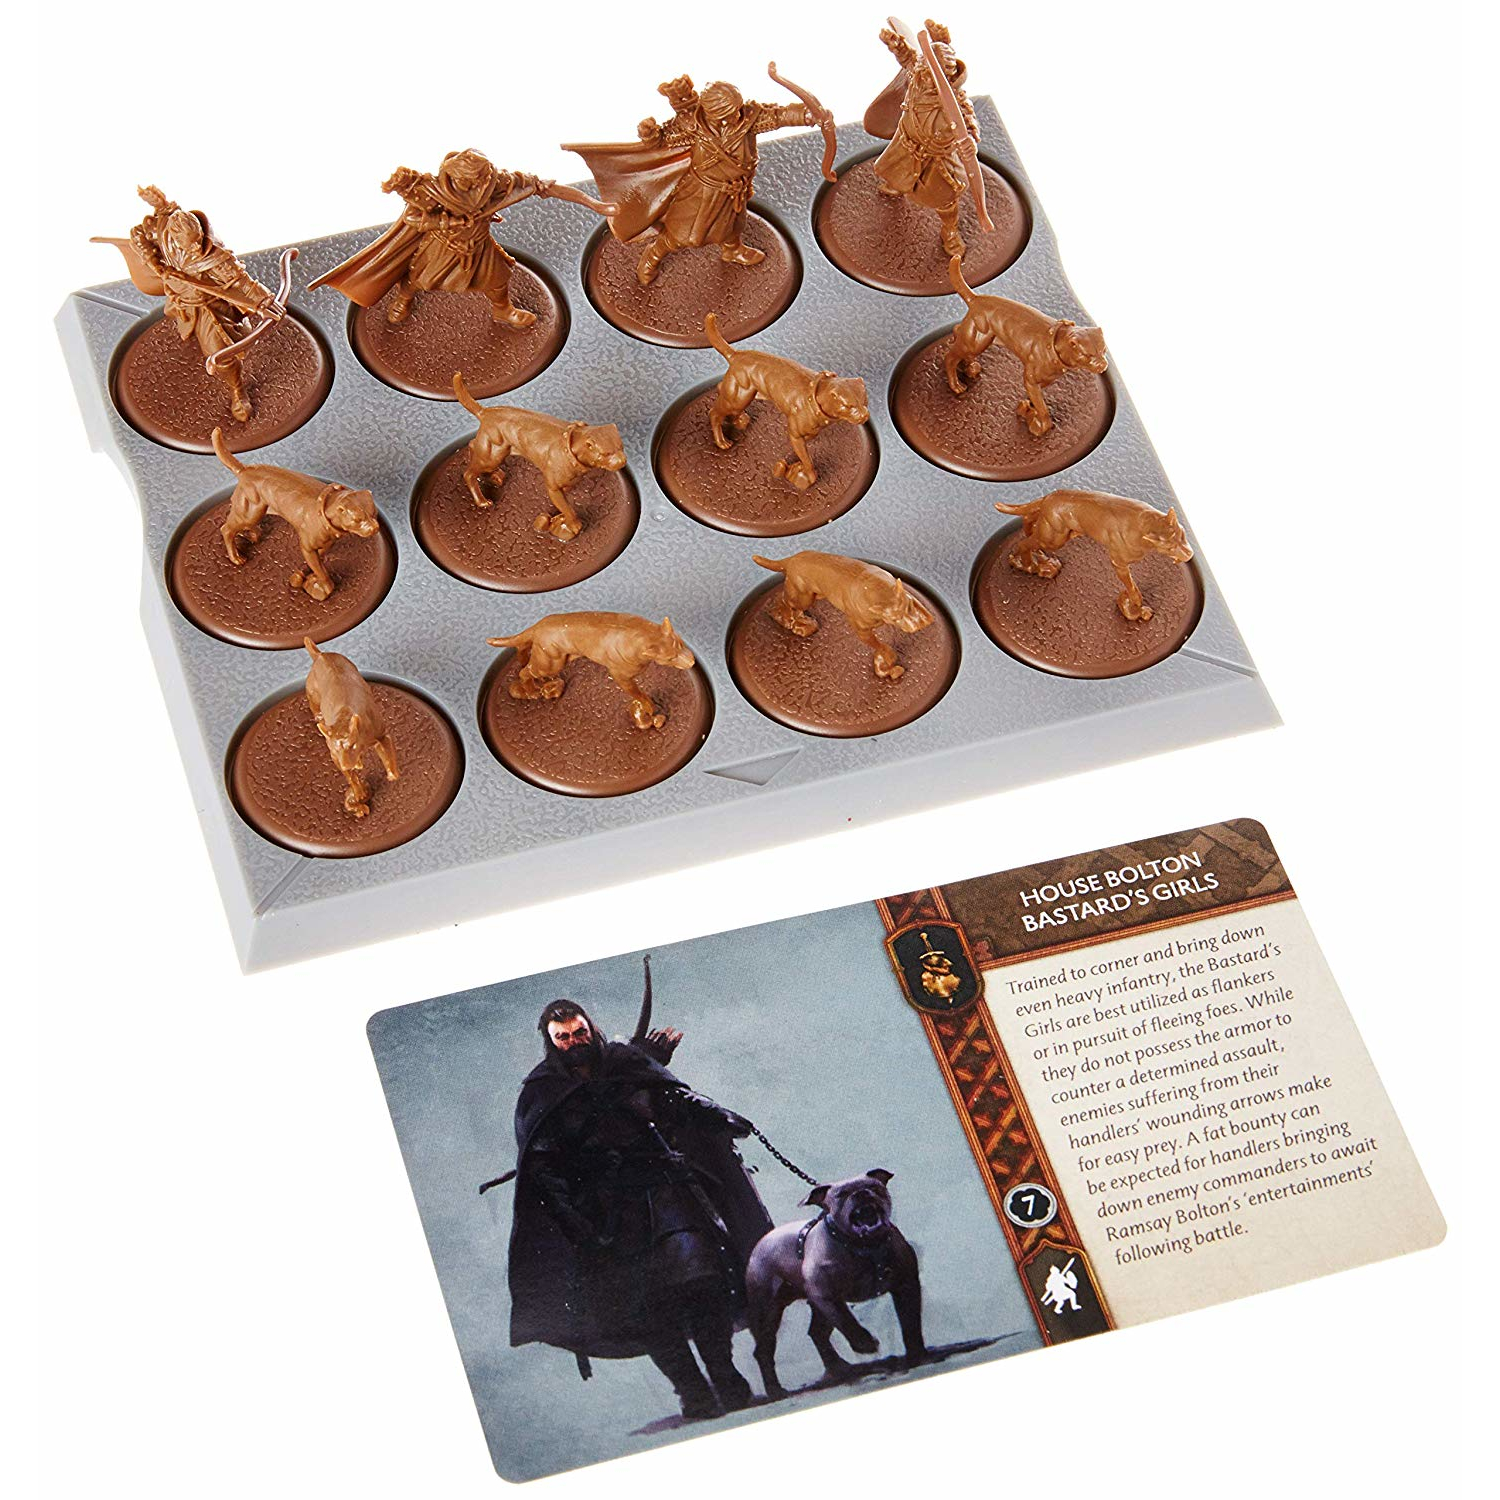 A Song of Ice and Fire: Tabletop Miniatures Game Bolton Bastard's Girls Unit Box, by CMON - image 2 of 9